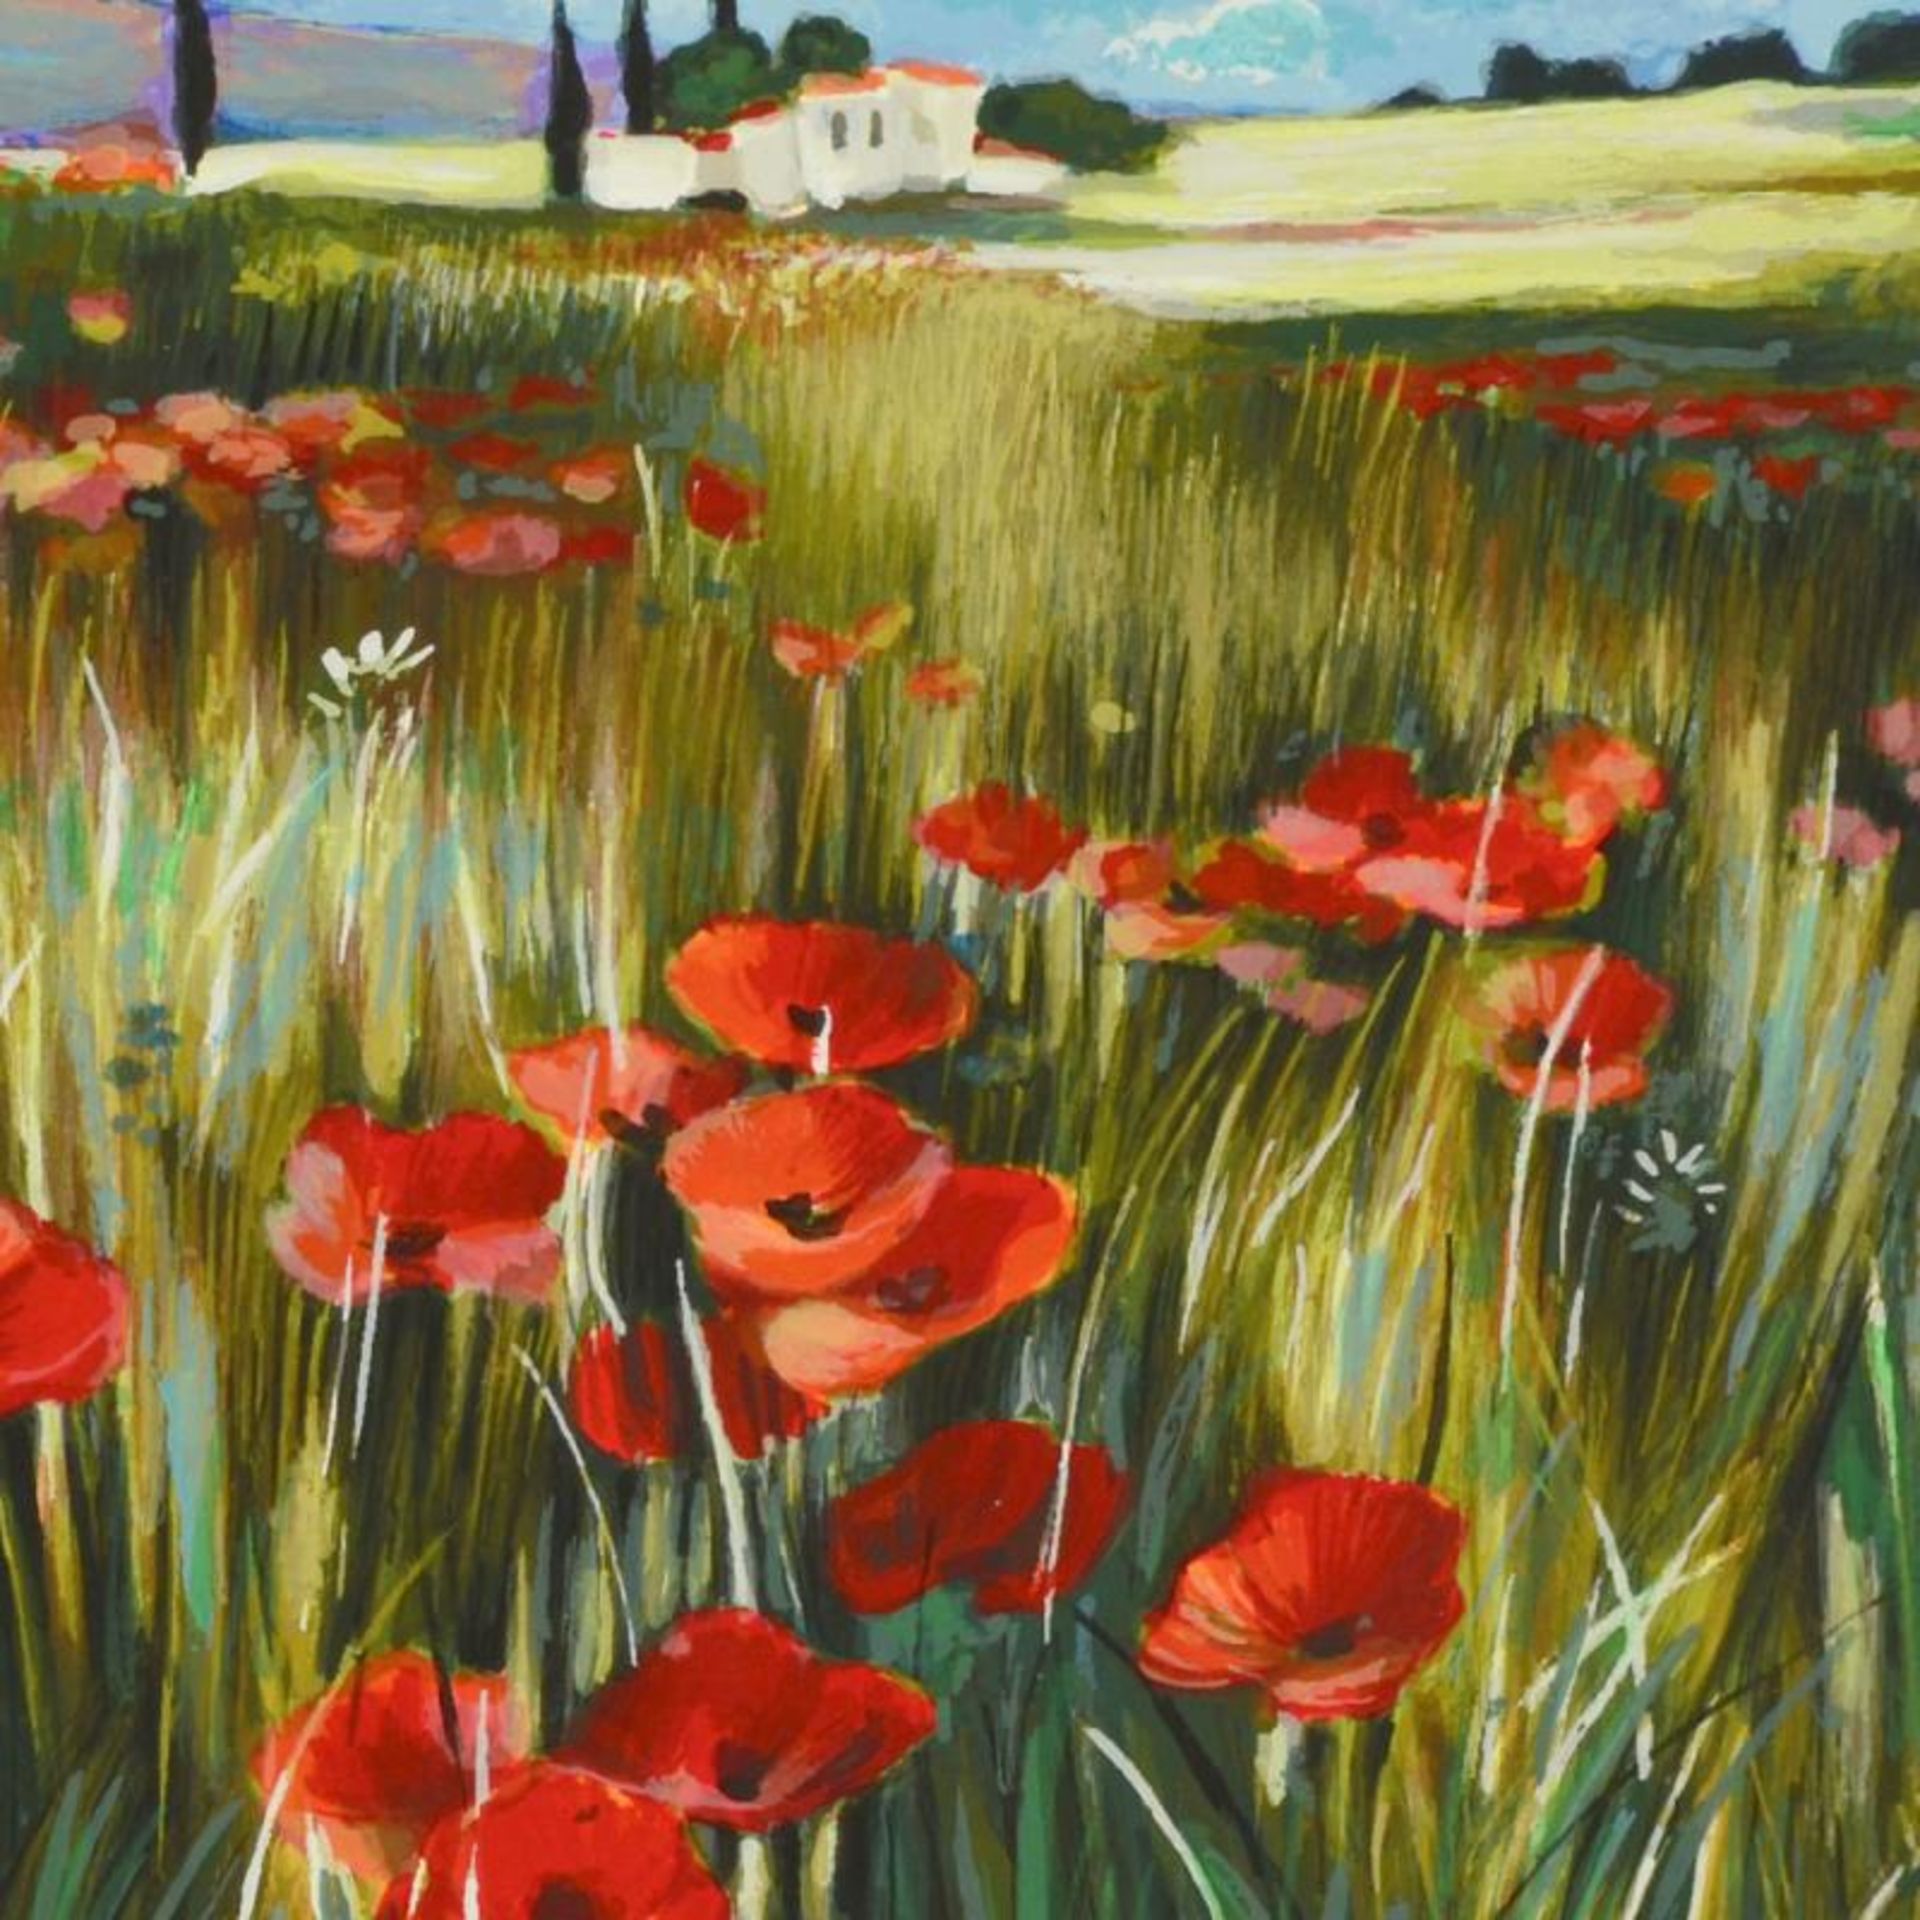 Yuri Dupond, "Red Meadow" Limited Edition Serigraph, Numbered and Hand Signed wi - Image 2 of 2